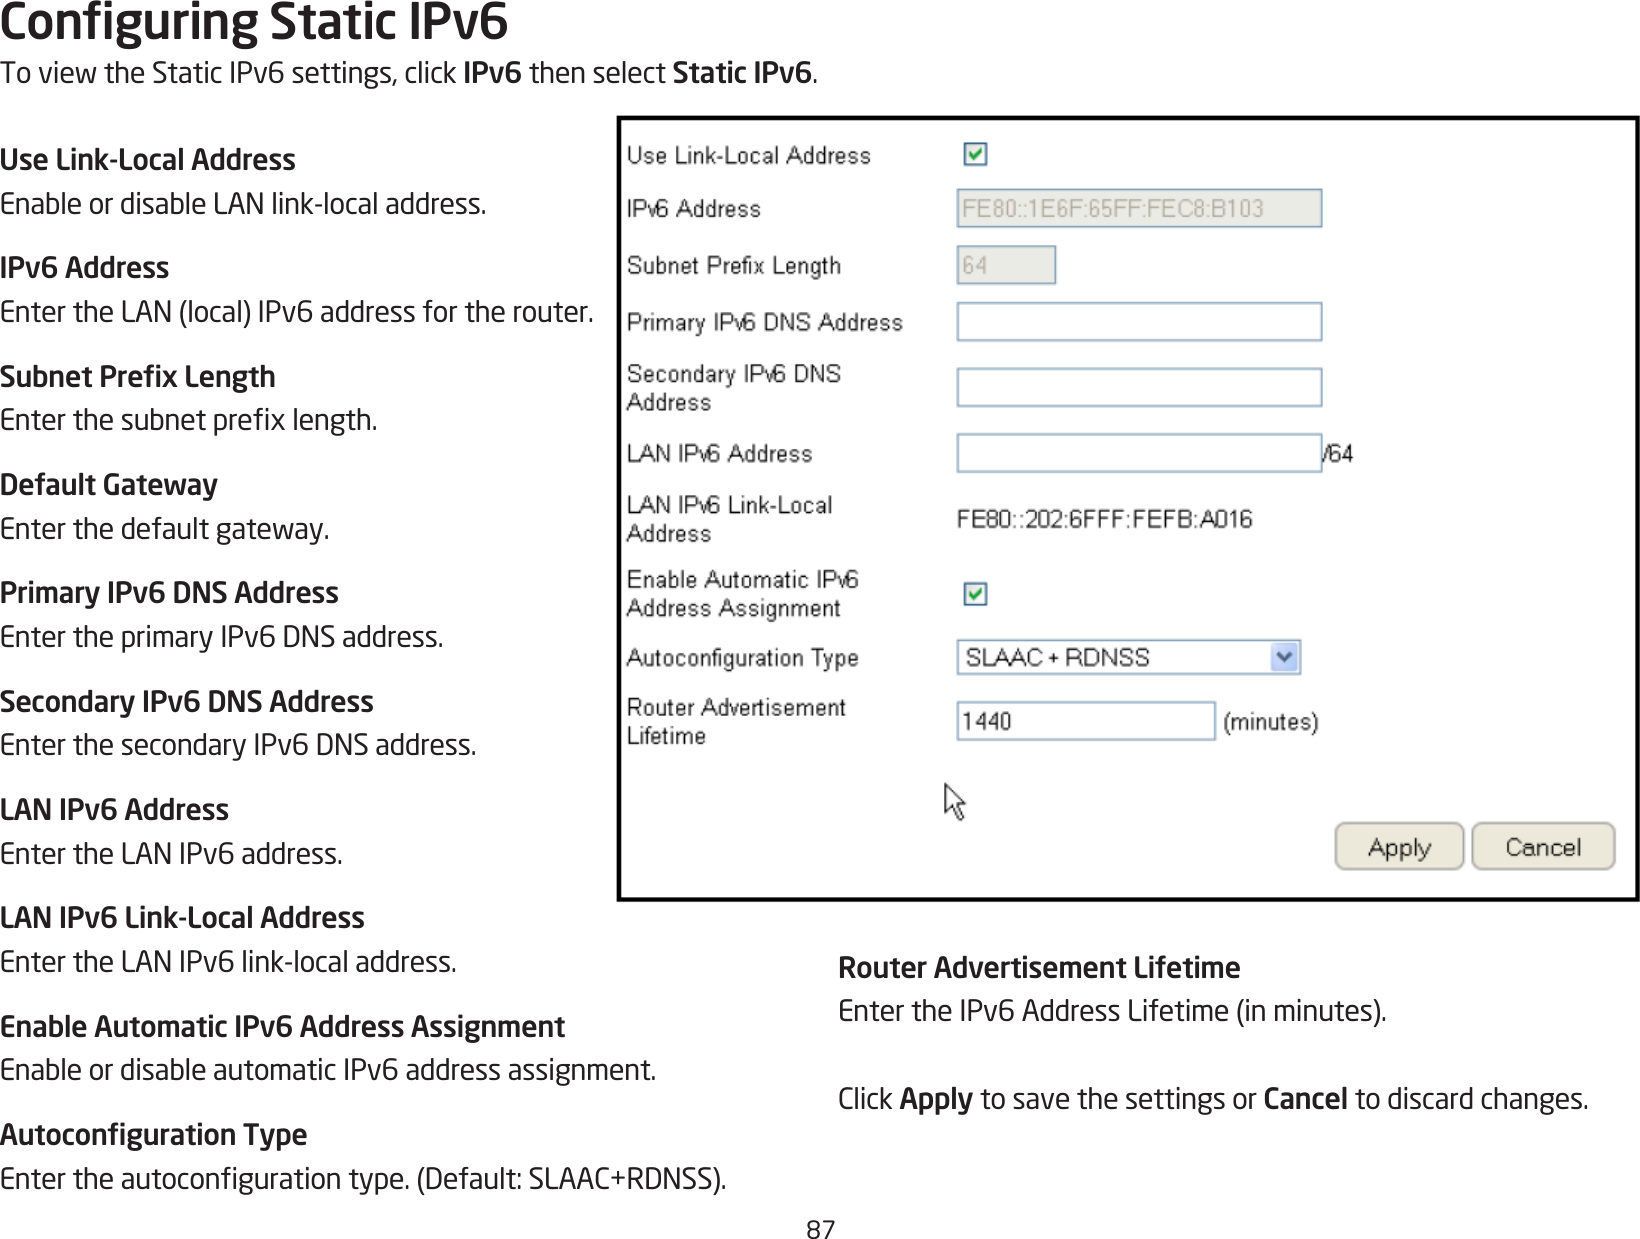 87Conguring Static IPv6ToviewtheStaticIPv6settings,clickIPv6 then select Static IPv6.Use Link-Local AddressEnableordisableLANlink-localaddress.IPv6 AddressEntertheLAN(local)IPv6addressfortherouter.Subnet Prex LengthEnterthesubnetprexlength.Default GatewayEnterthedefaultgateway.Primary IPv6 DNS AddressEntertheprimaryIPv6DNSaddress.Secondary IPv6 DNS AddressEnterthesecondaryIPv6DNSaddress.LAN IPv6 AddressEntertheLANIPv6address.LAN IPv6 Link-Local AddressEntertheLANIPv6link-localaddress.Enable Automatic IPv6 Address AssignmentEnableordisableautomaticIPv6addressassignment.Autoconguration TypeEntertheautocongurationtype.(Default:SLAAC+RDNSS).Router Advertisement LifetimeEntertheIPv6AddressLifetime(inminutes).ClickApply to save the settings or Cancel to discard changes.